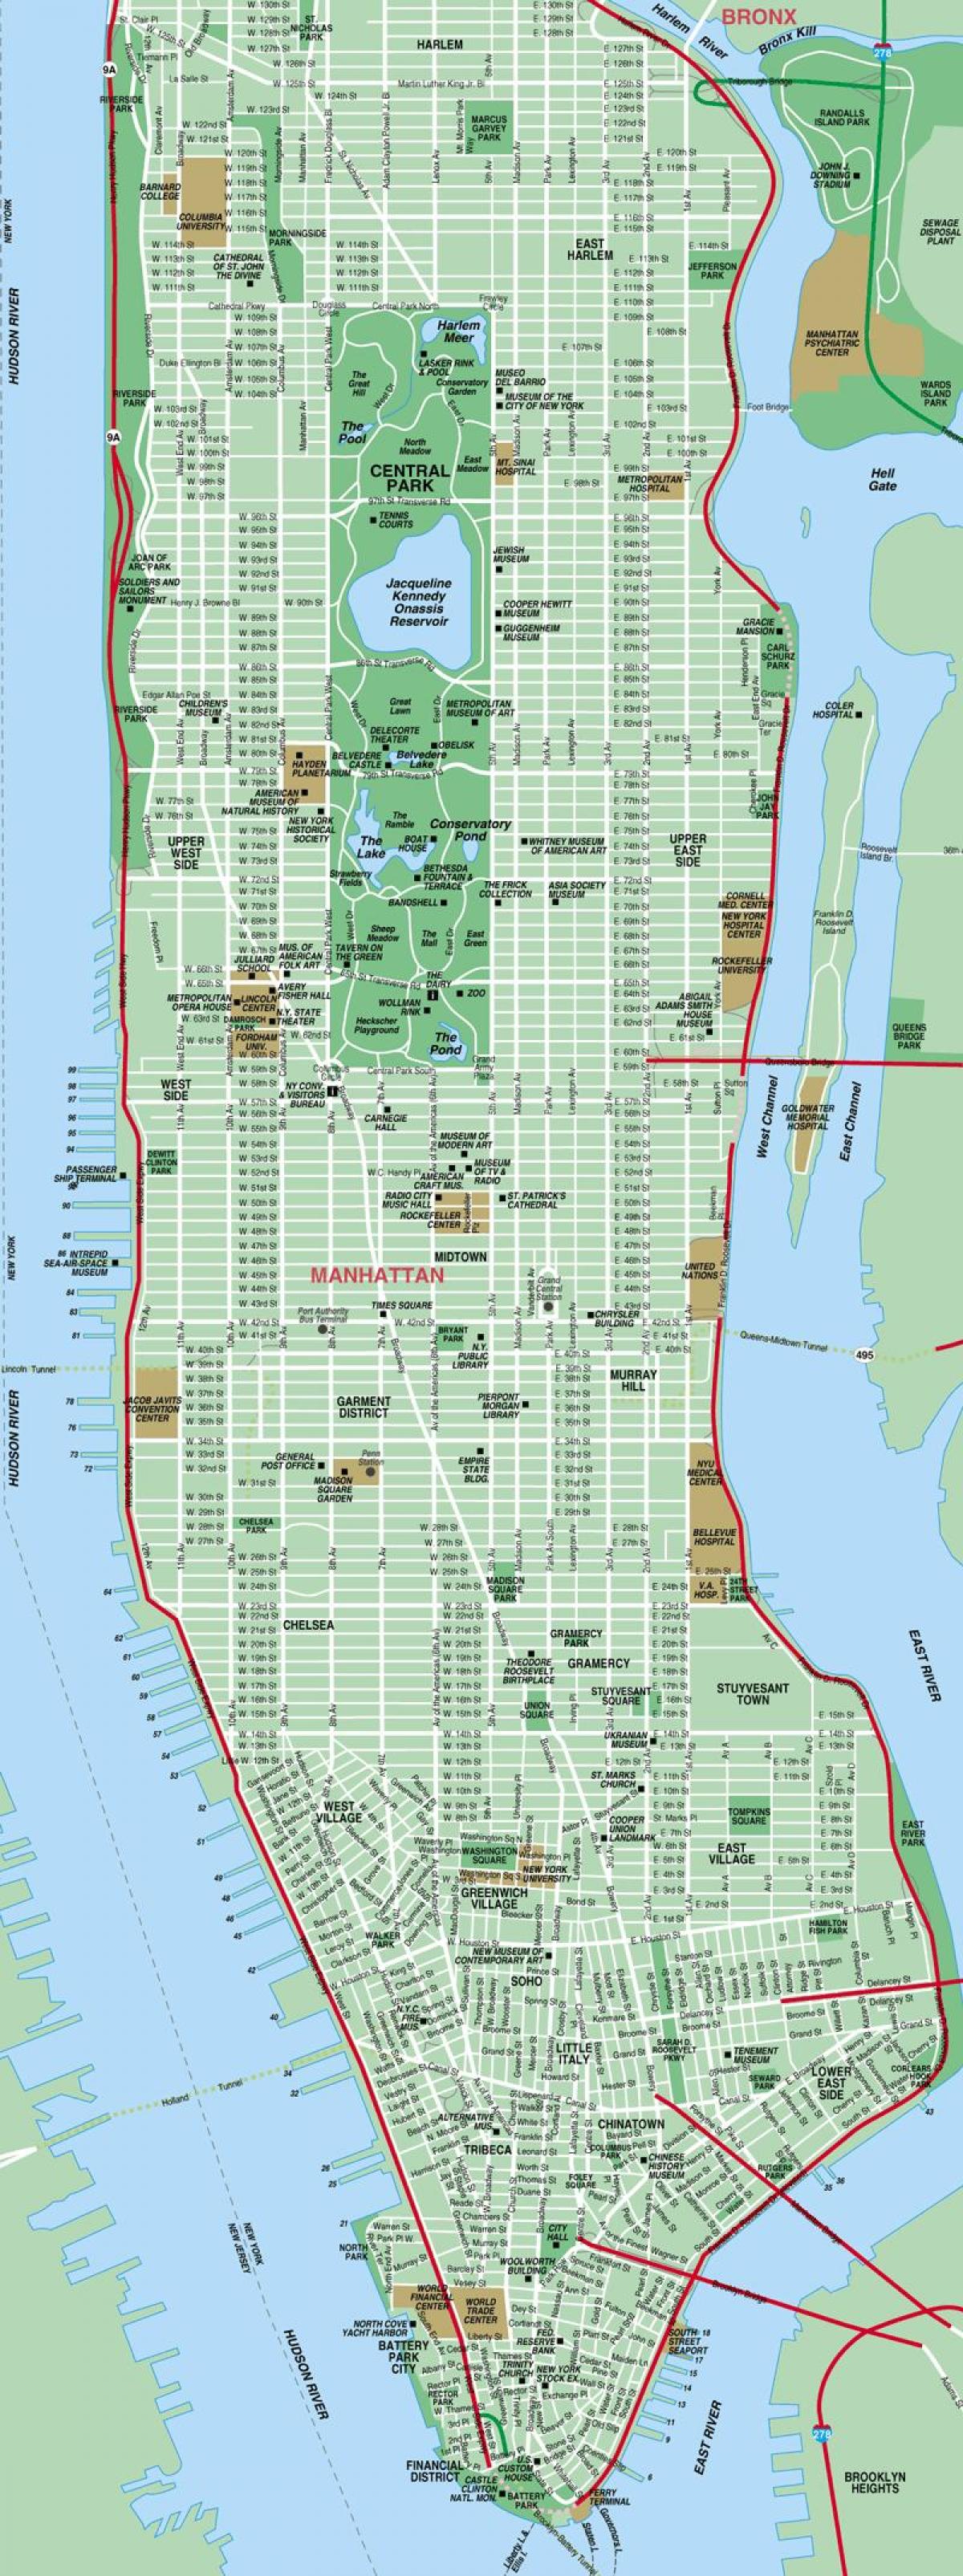 Manhattan map with streets and avenues - Manhattan street map high